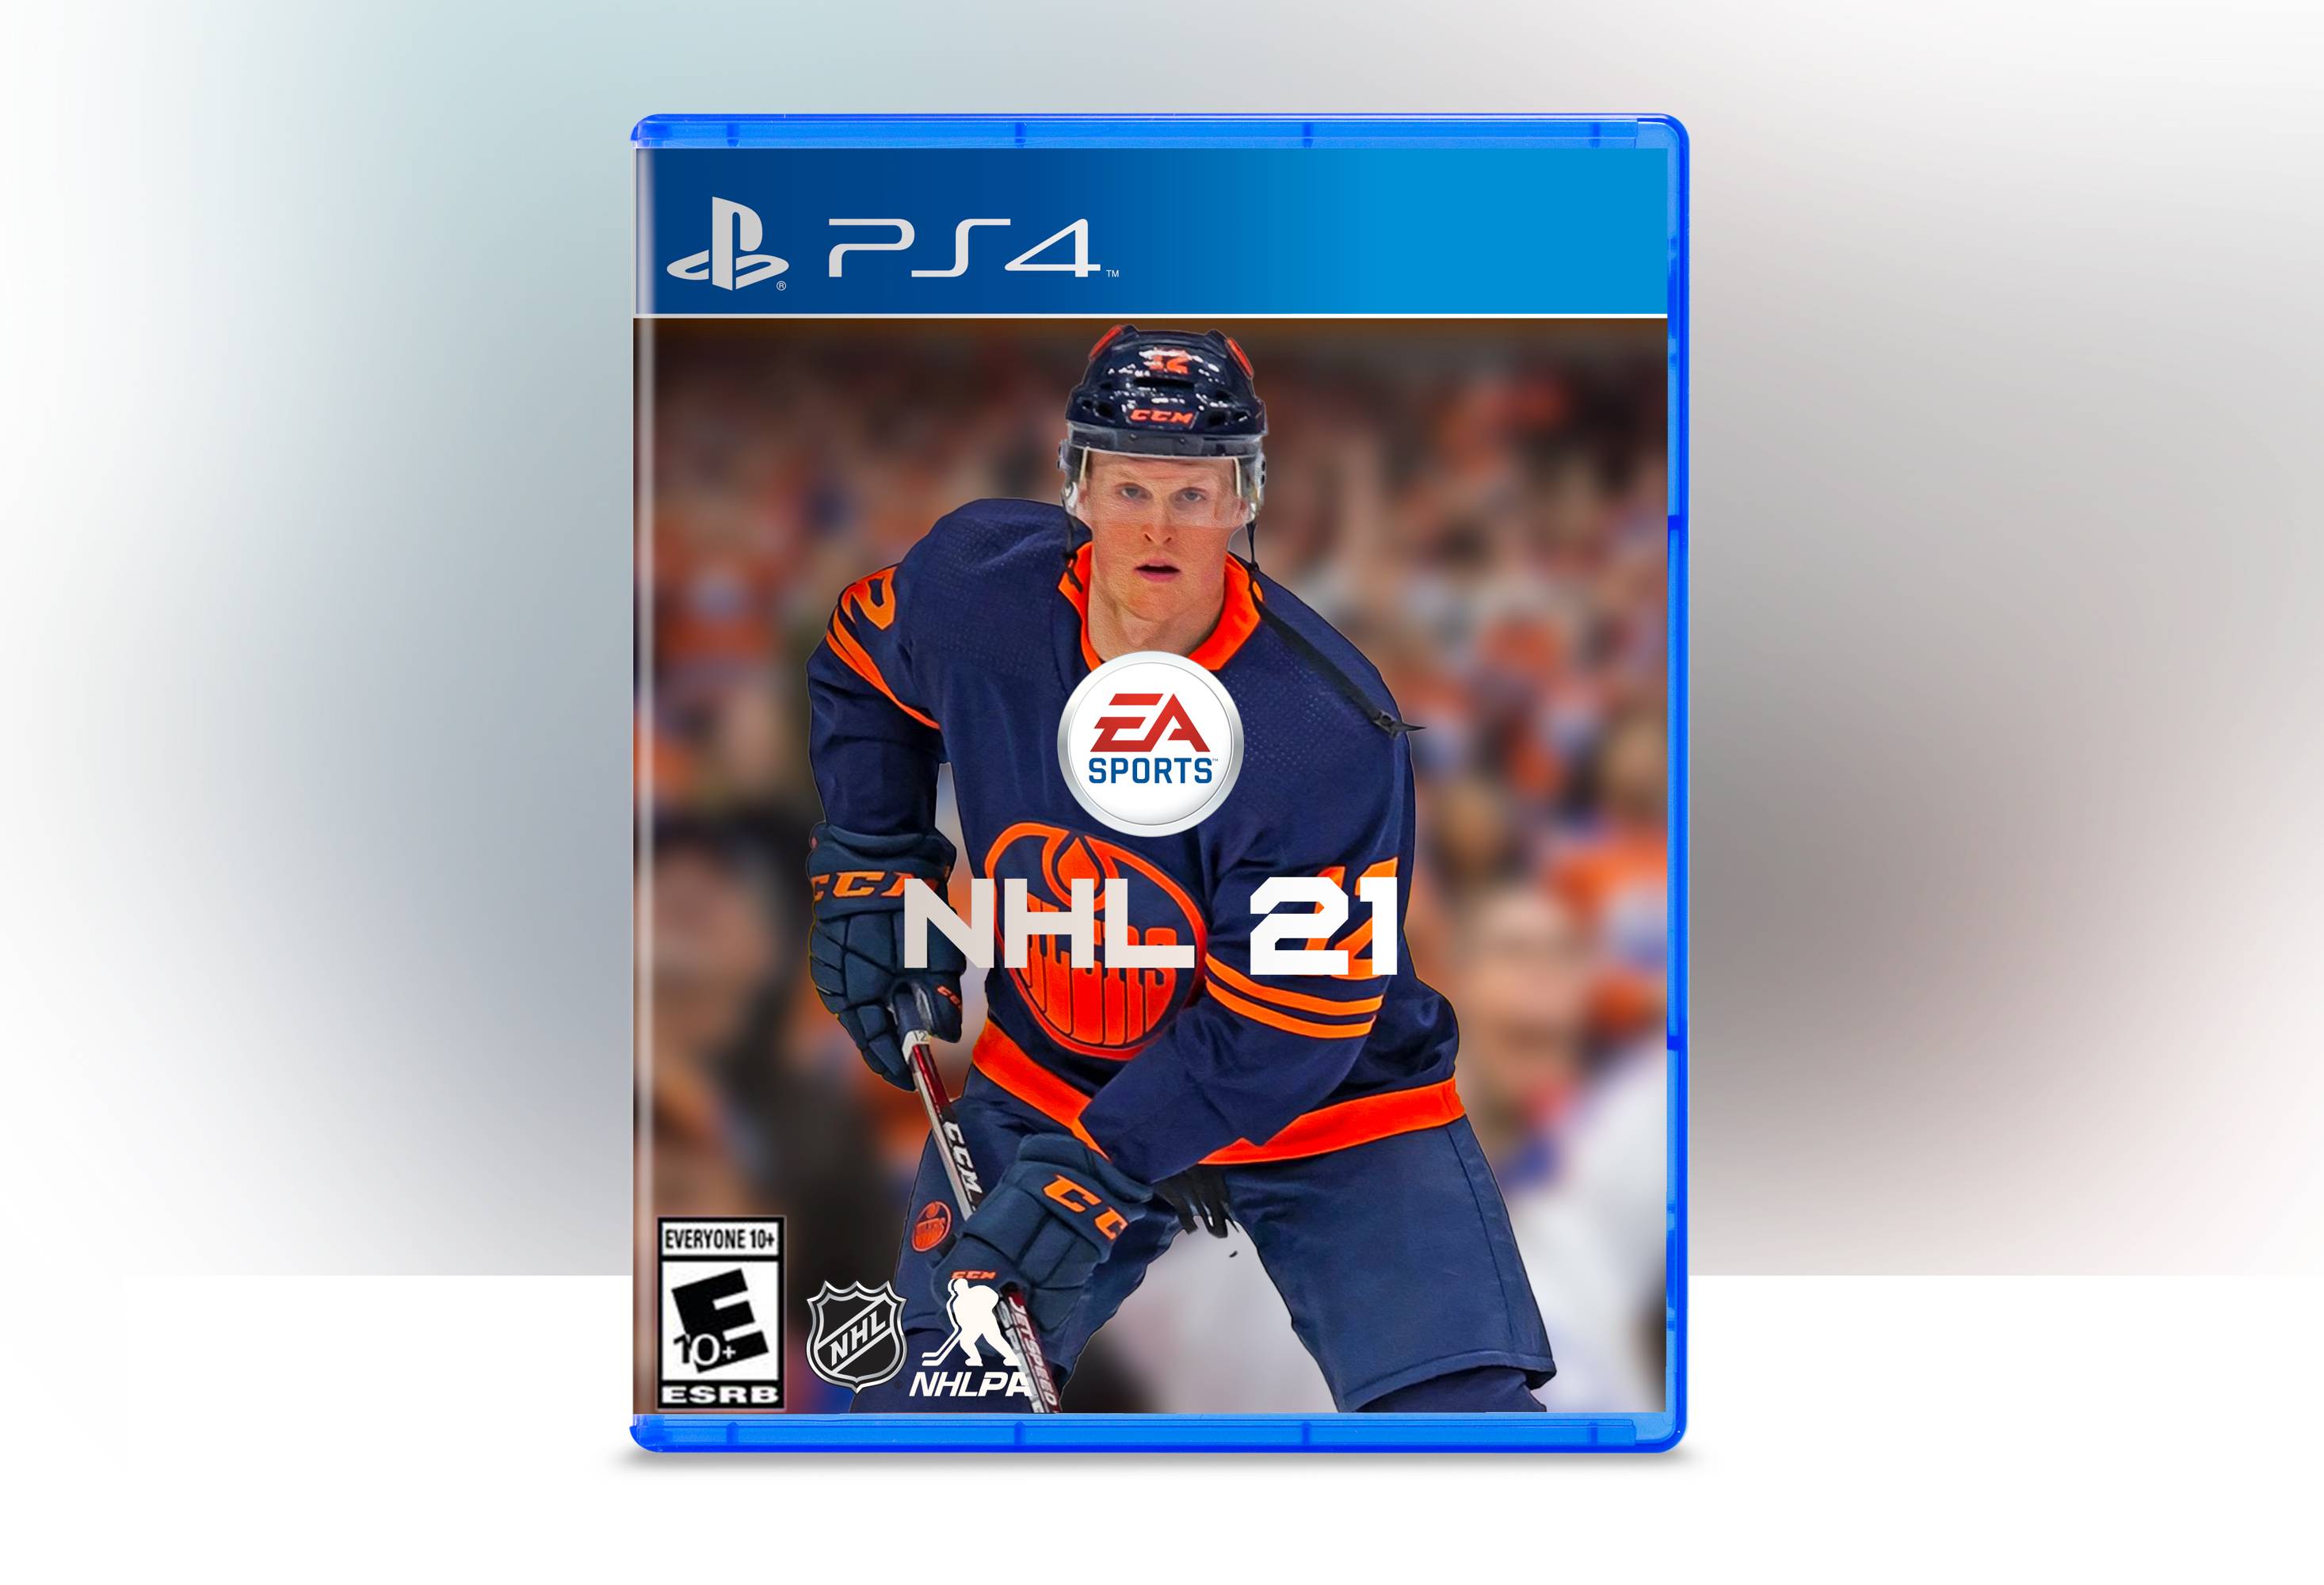 Super new to photohop but made a Colby Cave cover mockup for NHL